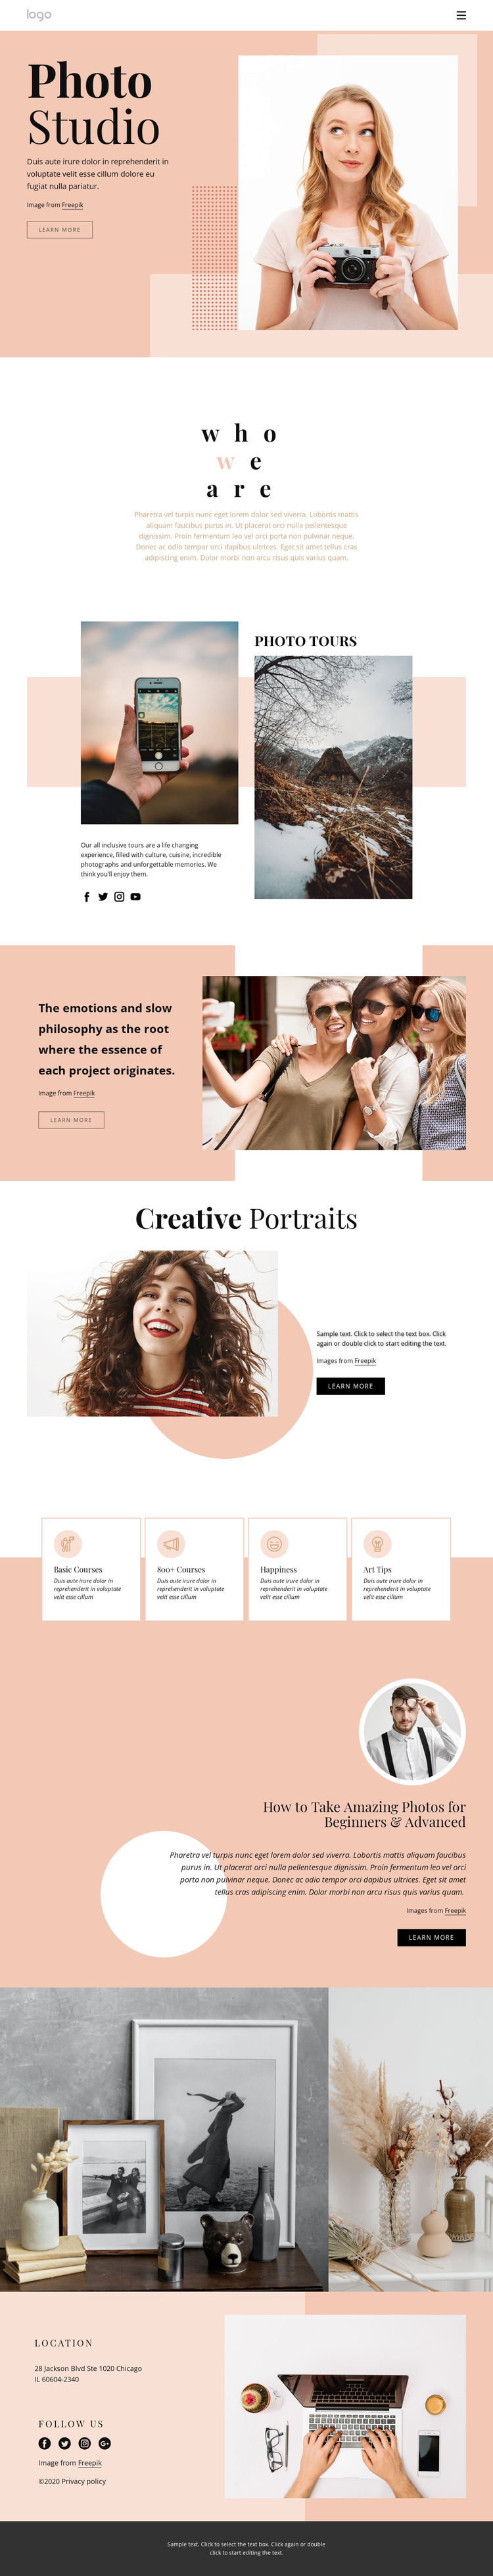 Photography courses Website Builder Software